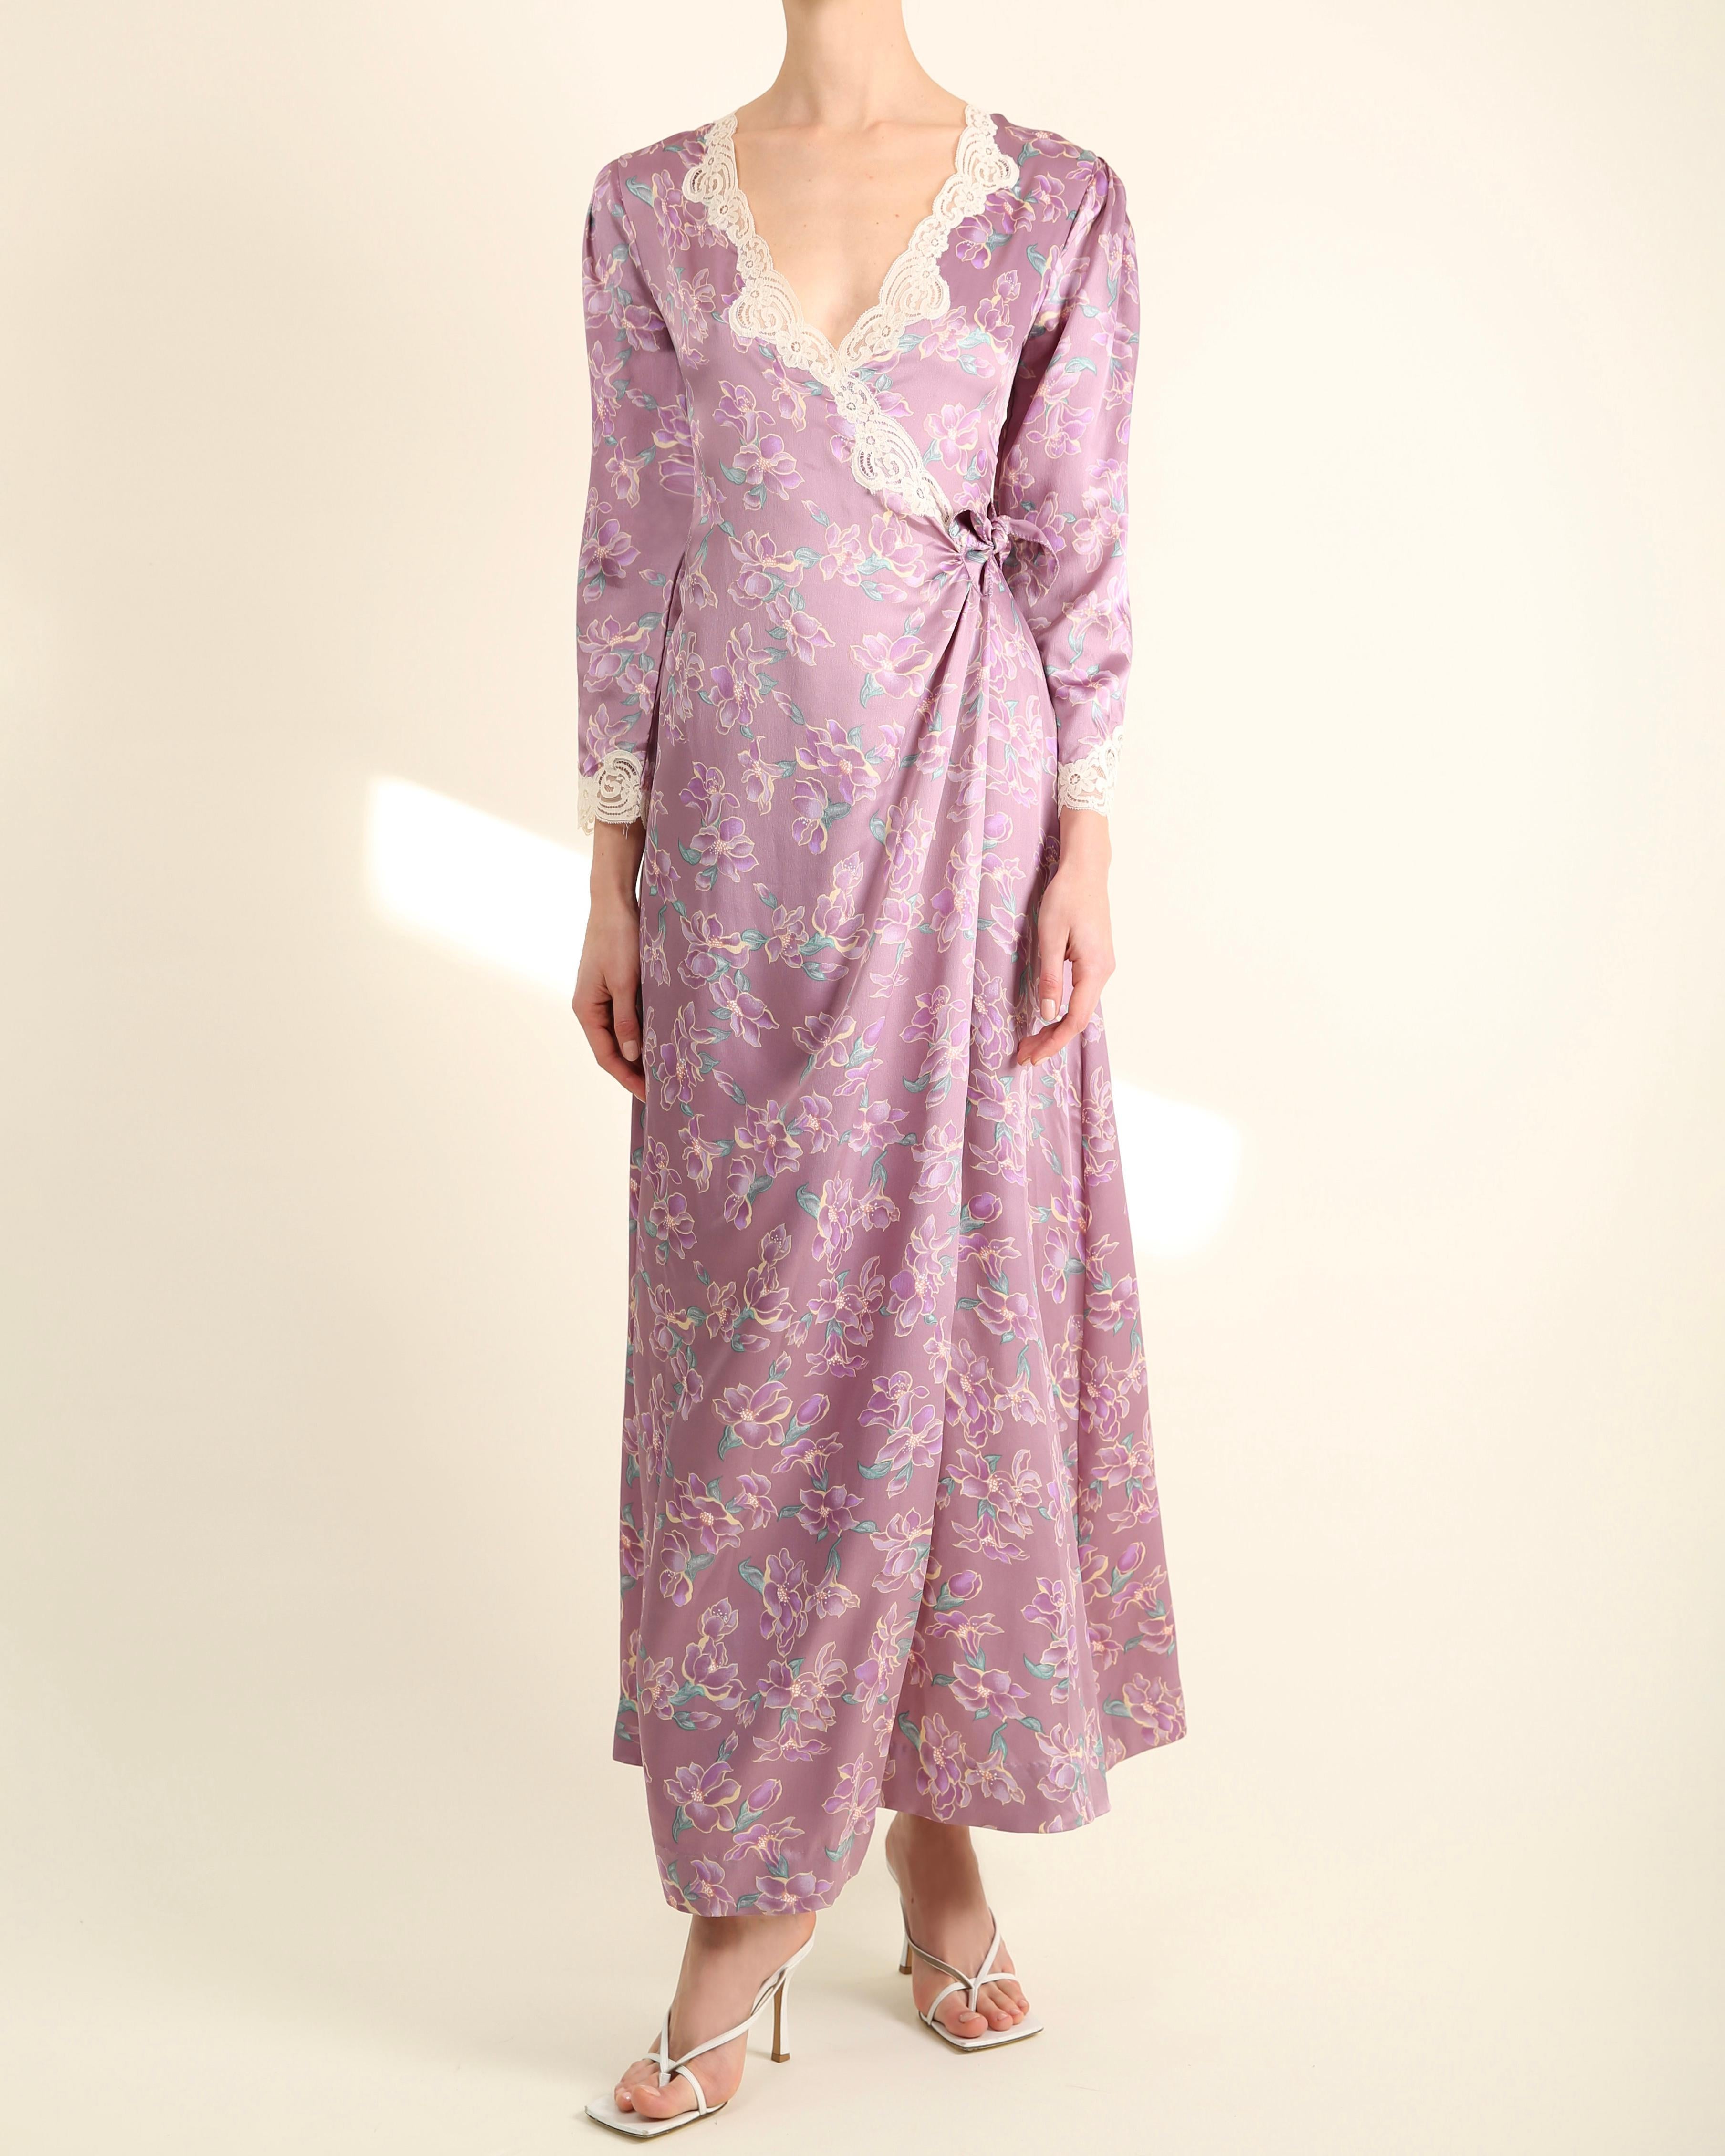 LOVE LALI Vintage

An extremely beautiful and very rare vintage robe from Christian Dior that can quite easily be worn in an evening as a dress.
It's a gorgeous colour of lilac with floral print in turquoise, taupe, peach and white with ivory lace